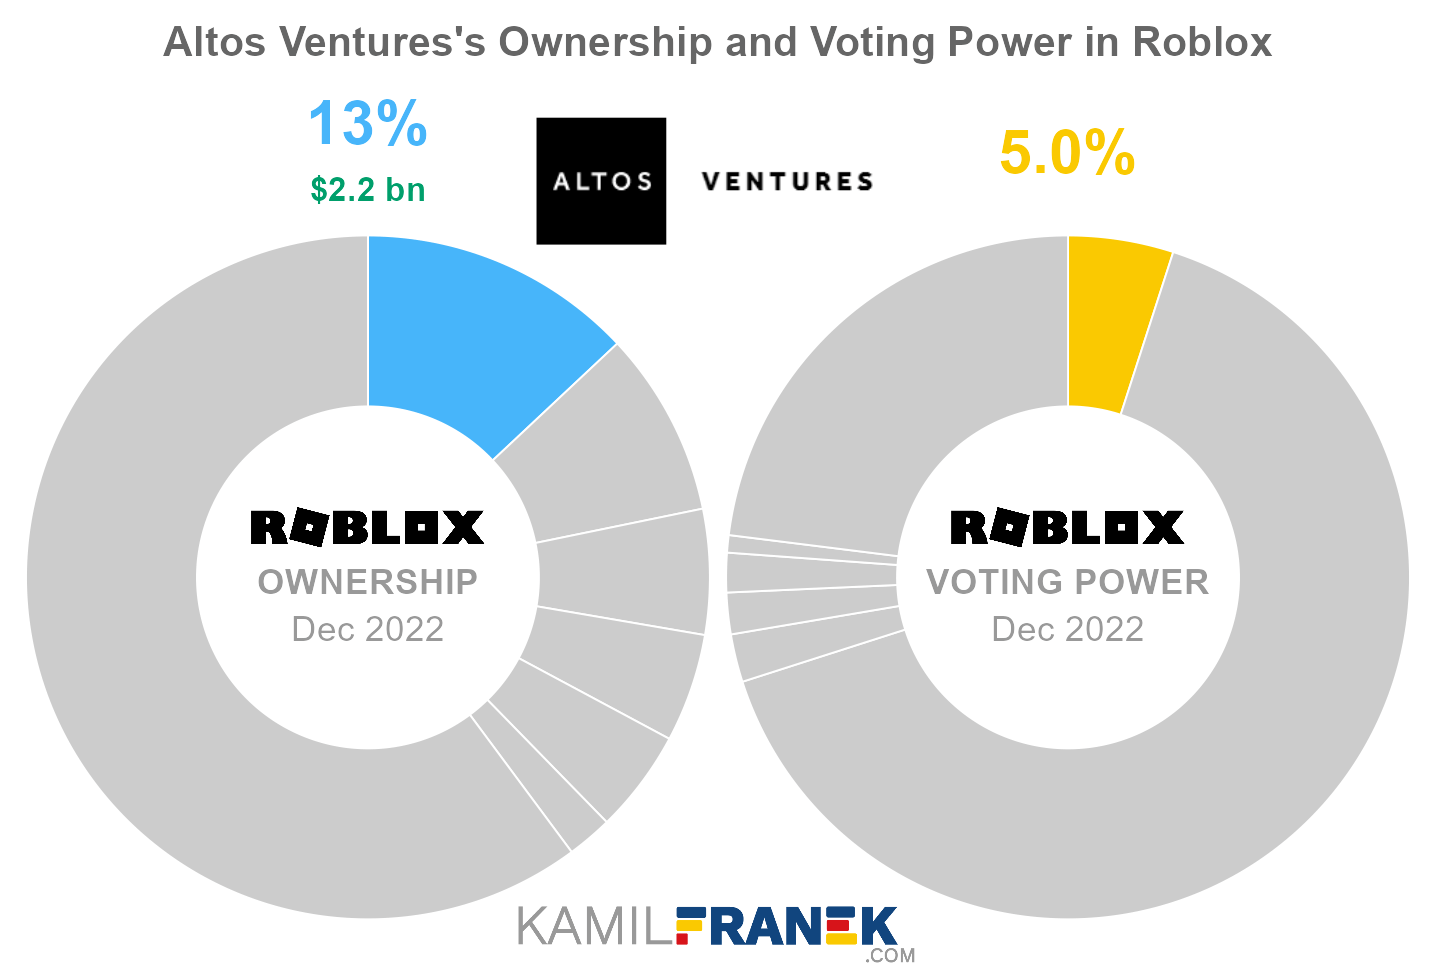 Altos Ventures's share ownership and voting power in Roblox (chart)